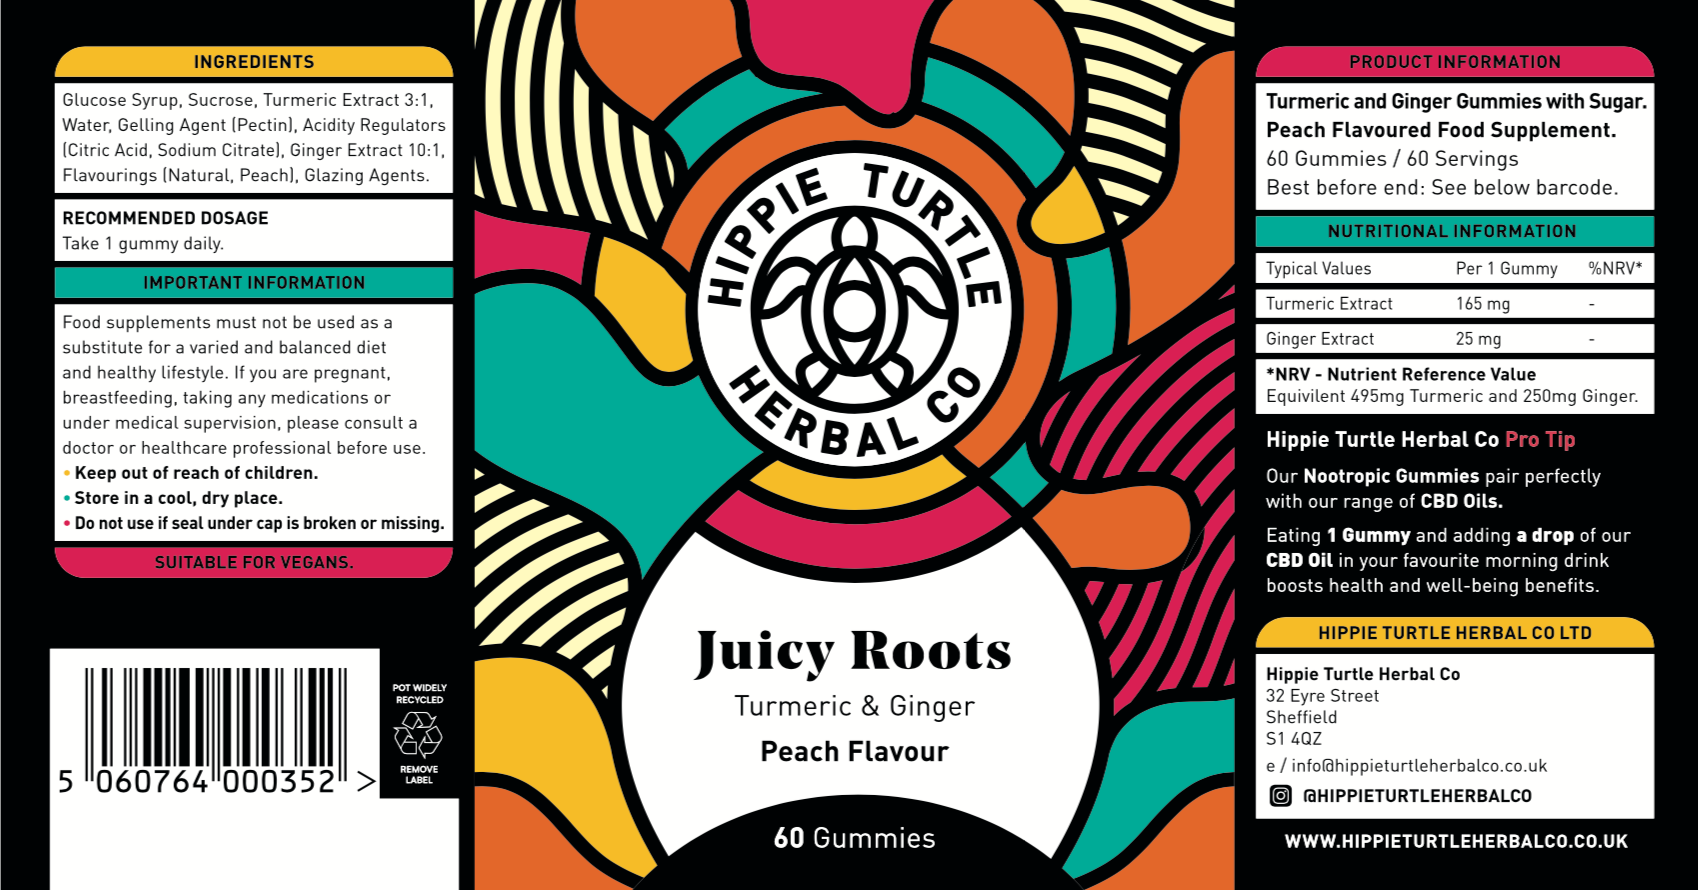 Juicy roots chewable turmeric and ginger supplement gummies to help digestion and reduce inflammation